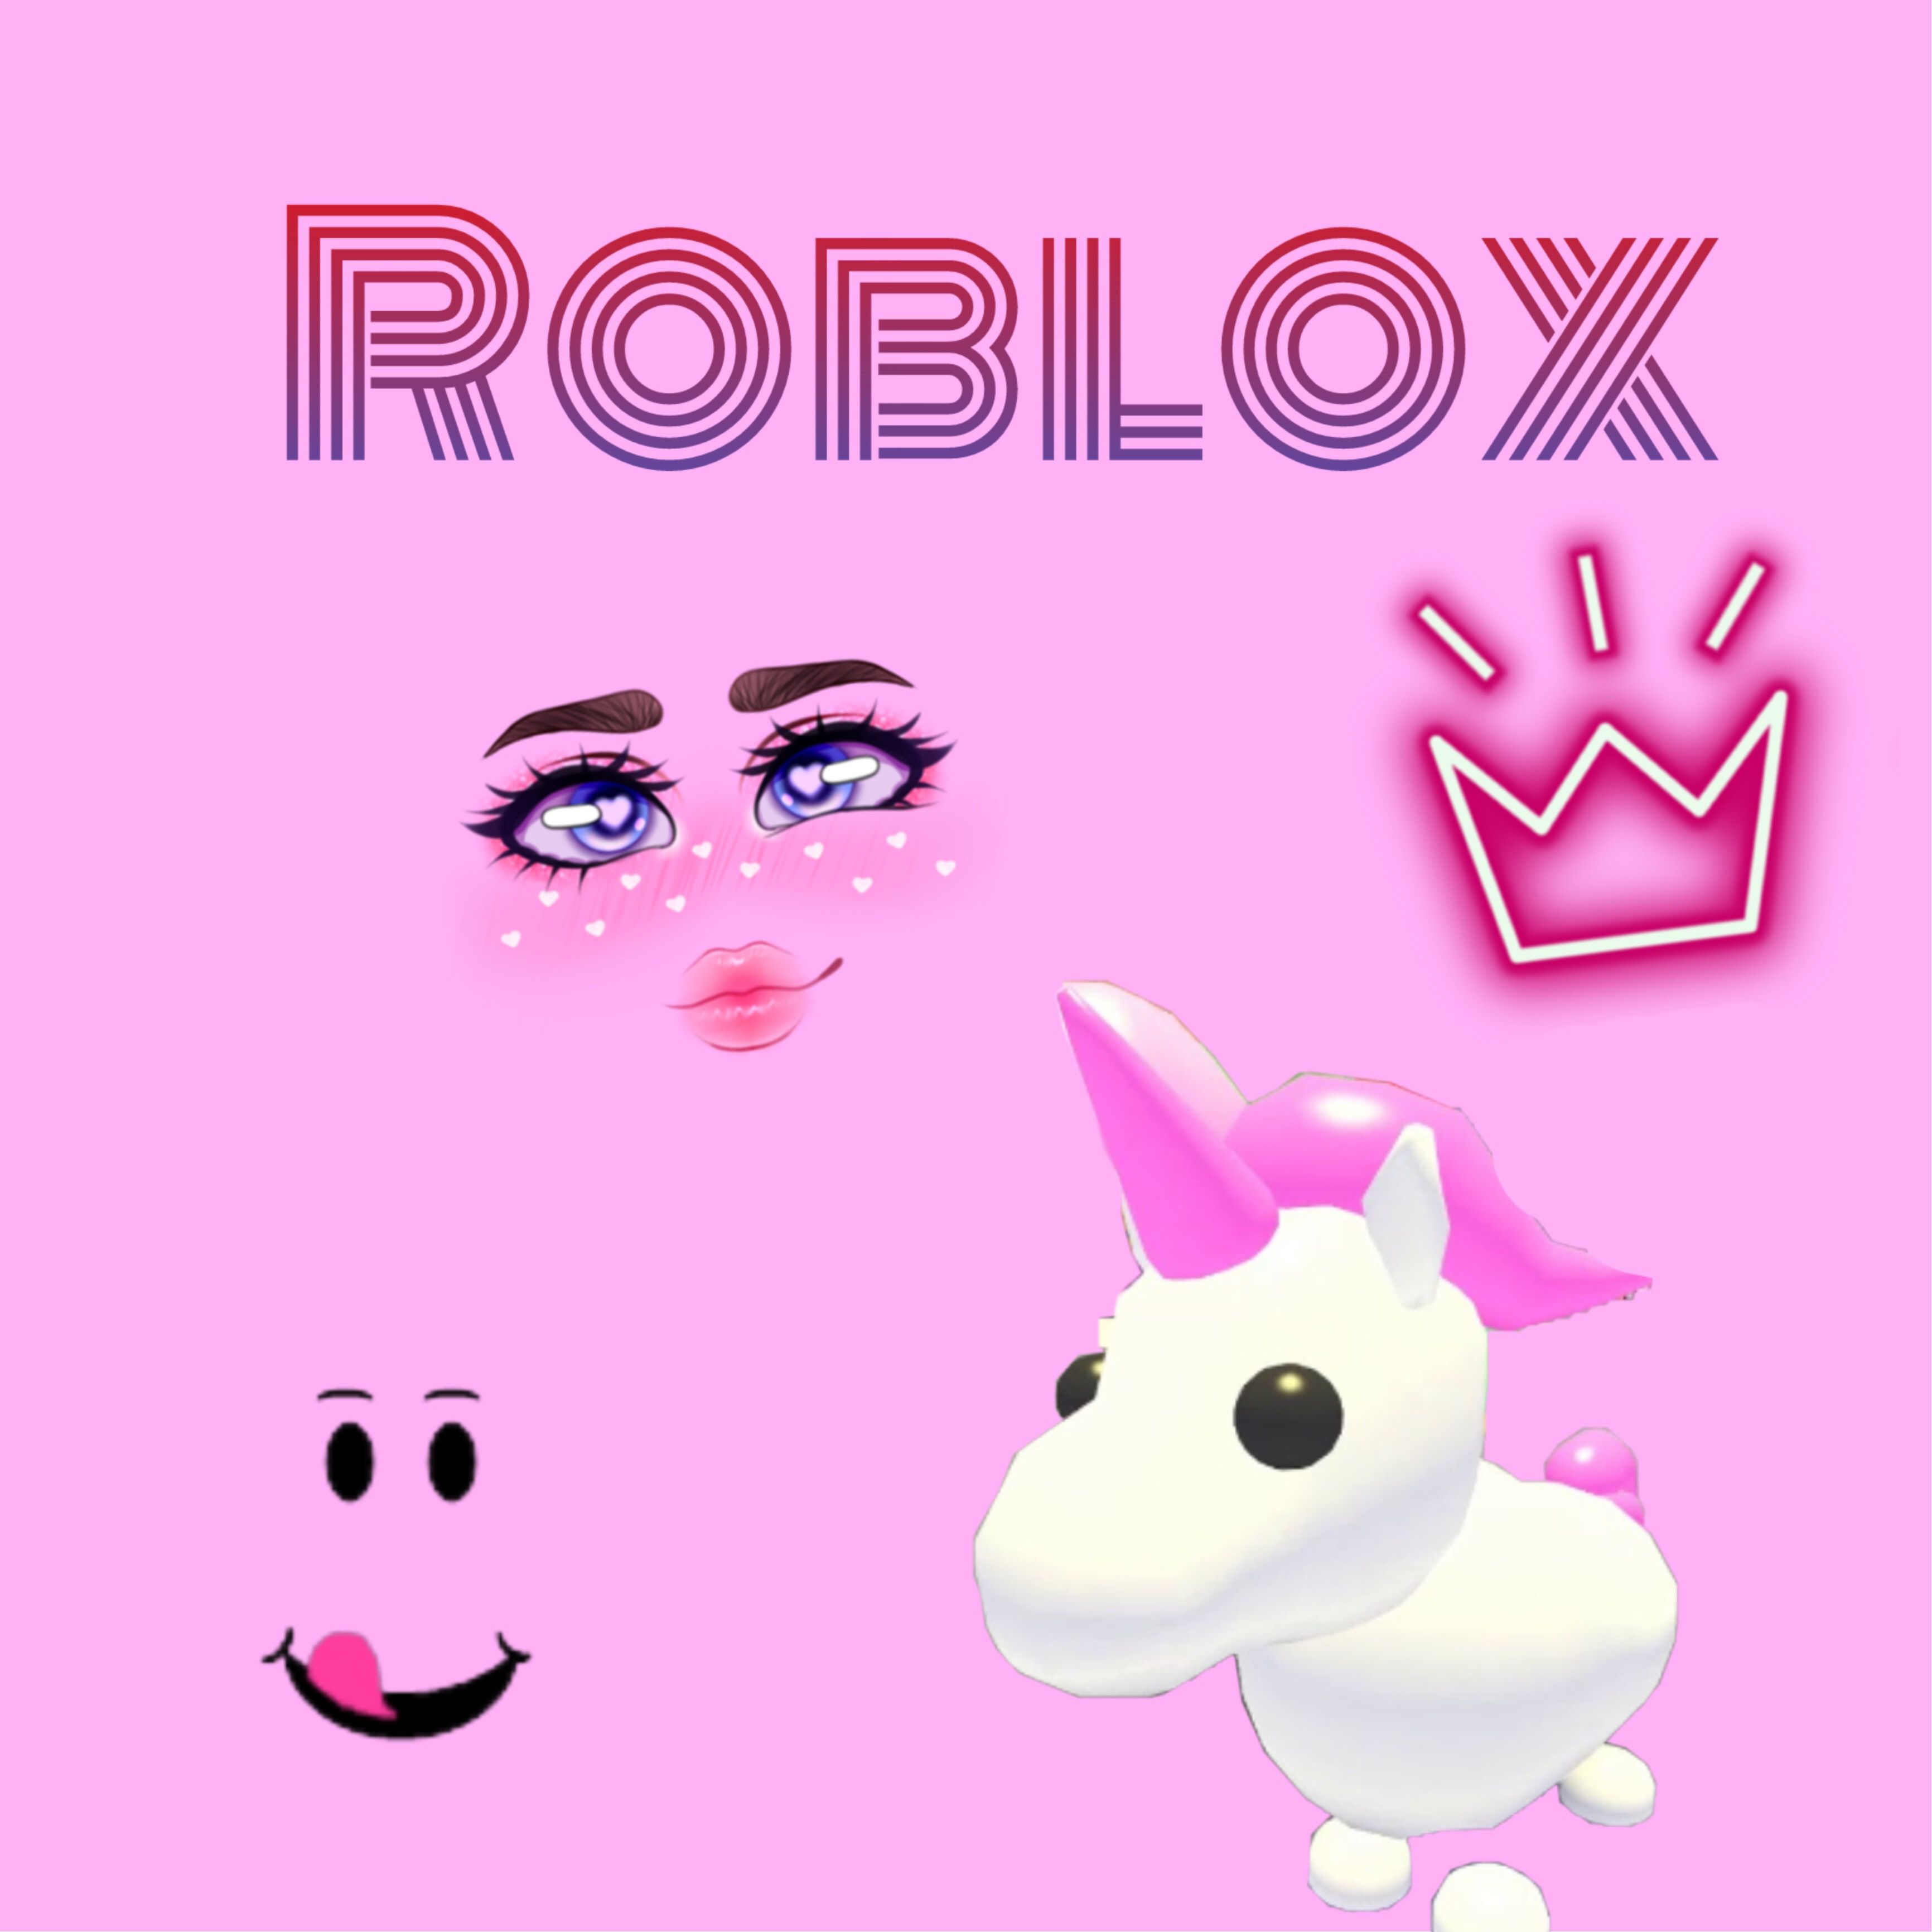 Aesthetic Roblox Boy Wallpapers - Wallpaper Cave